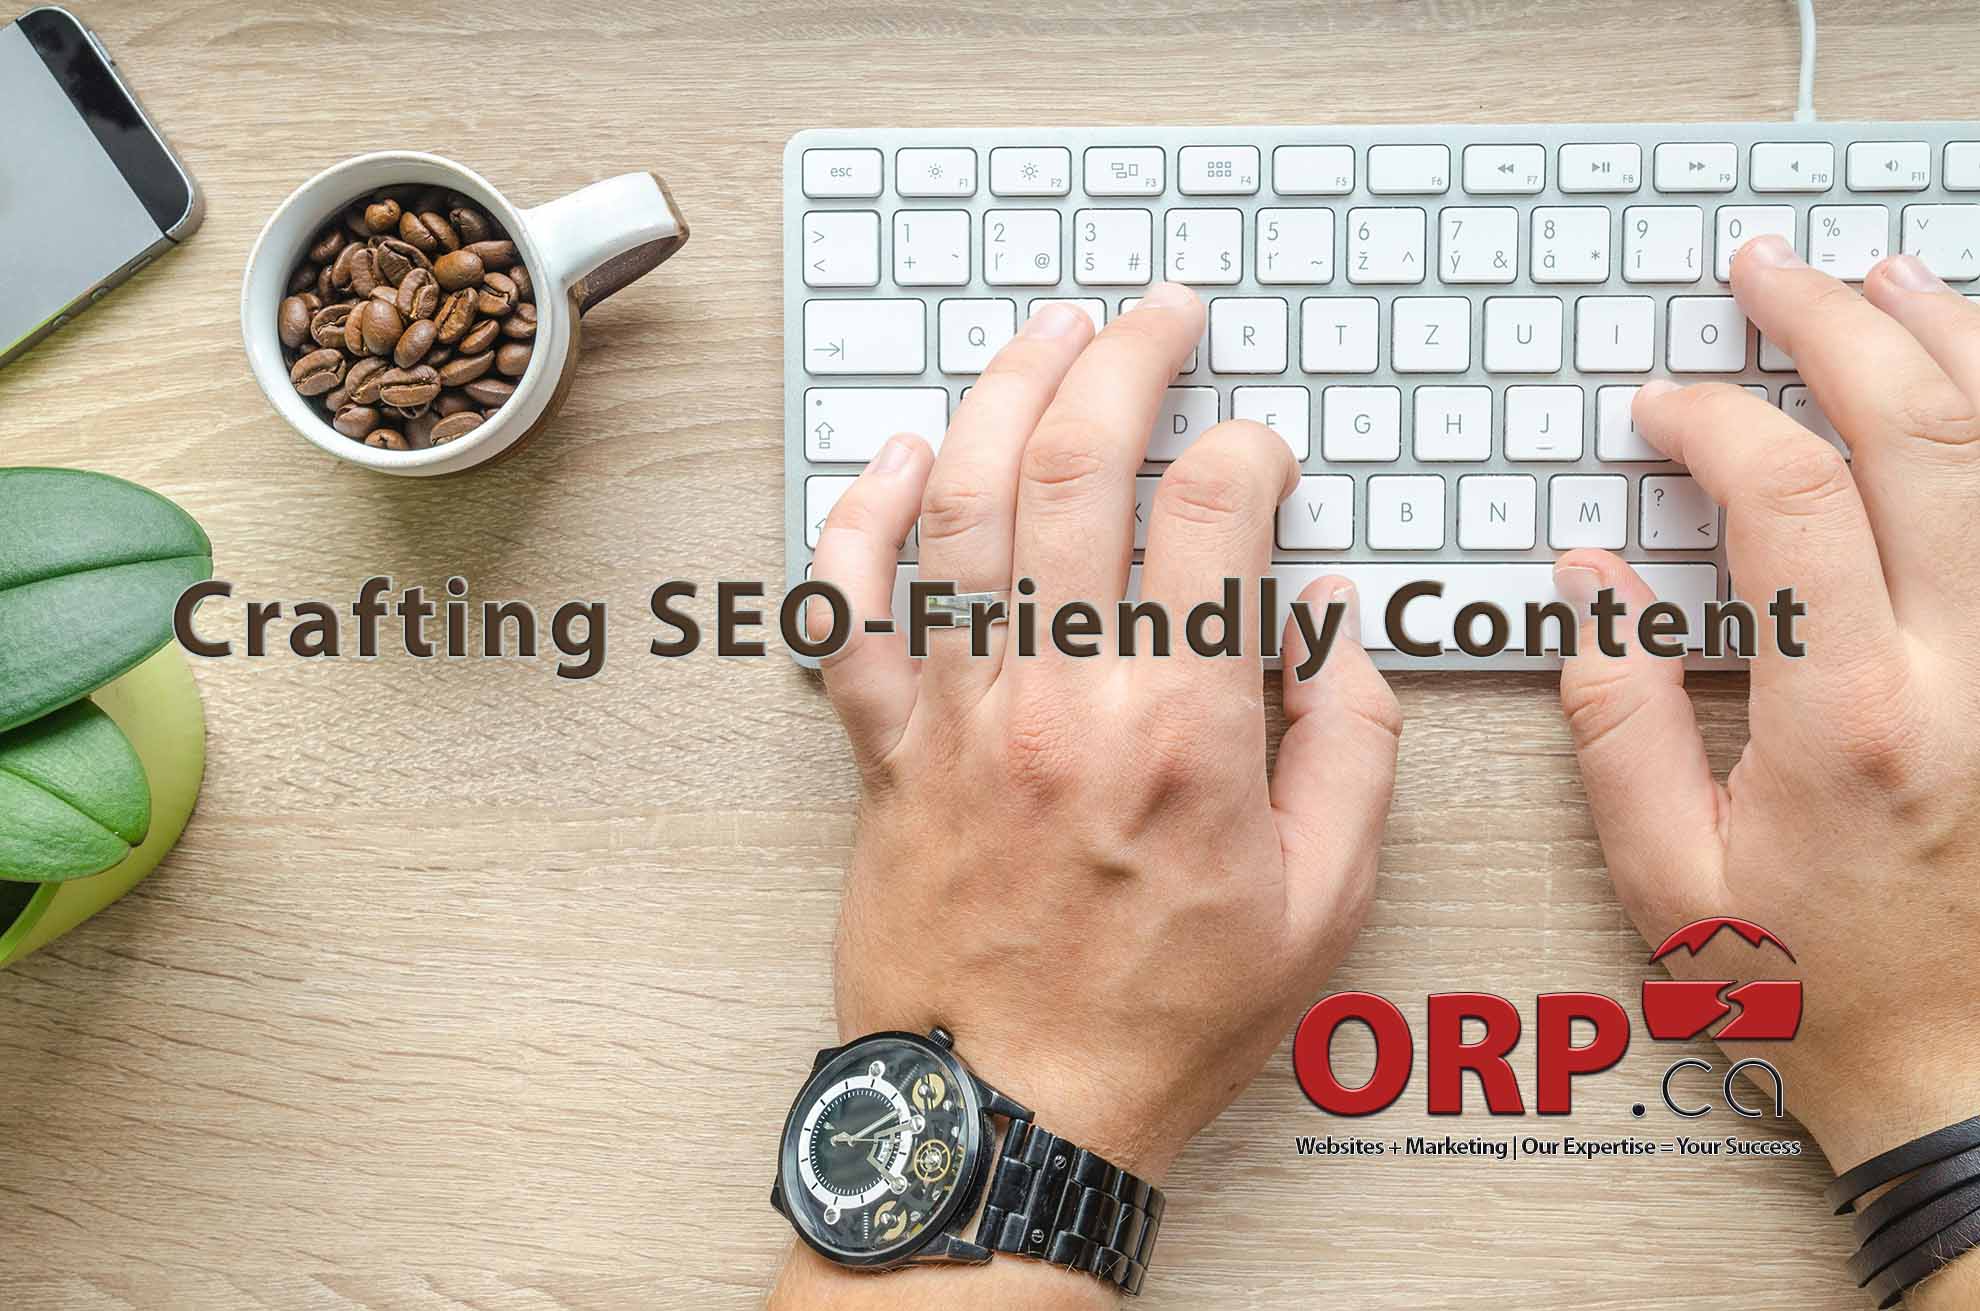 Crafting SEO Friendly Content - a small business digital marketing article from ORP.ca - Website design and support, digital marketing and consulting services.